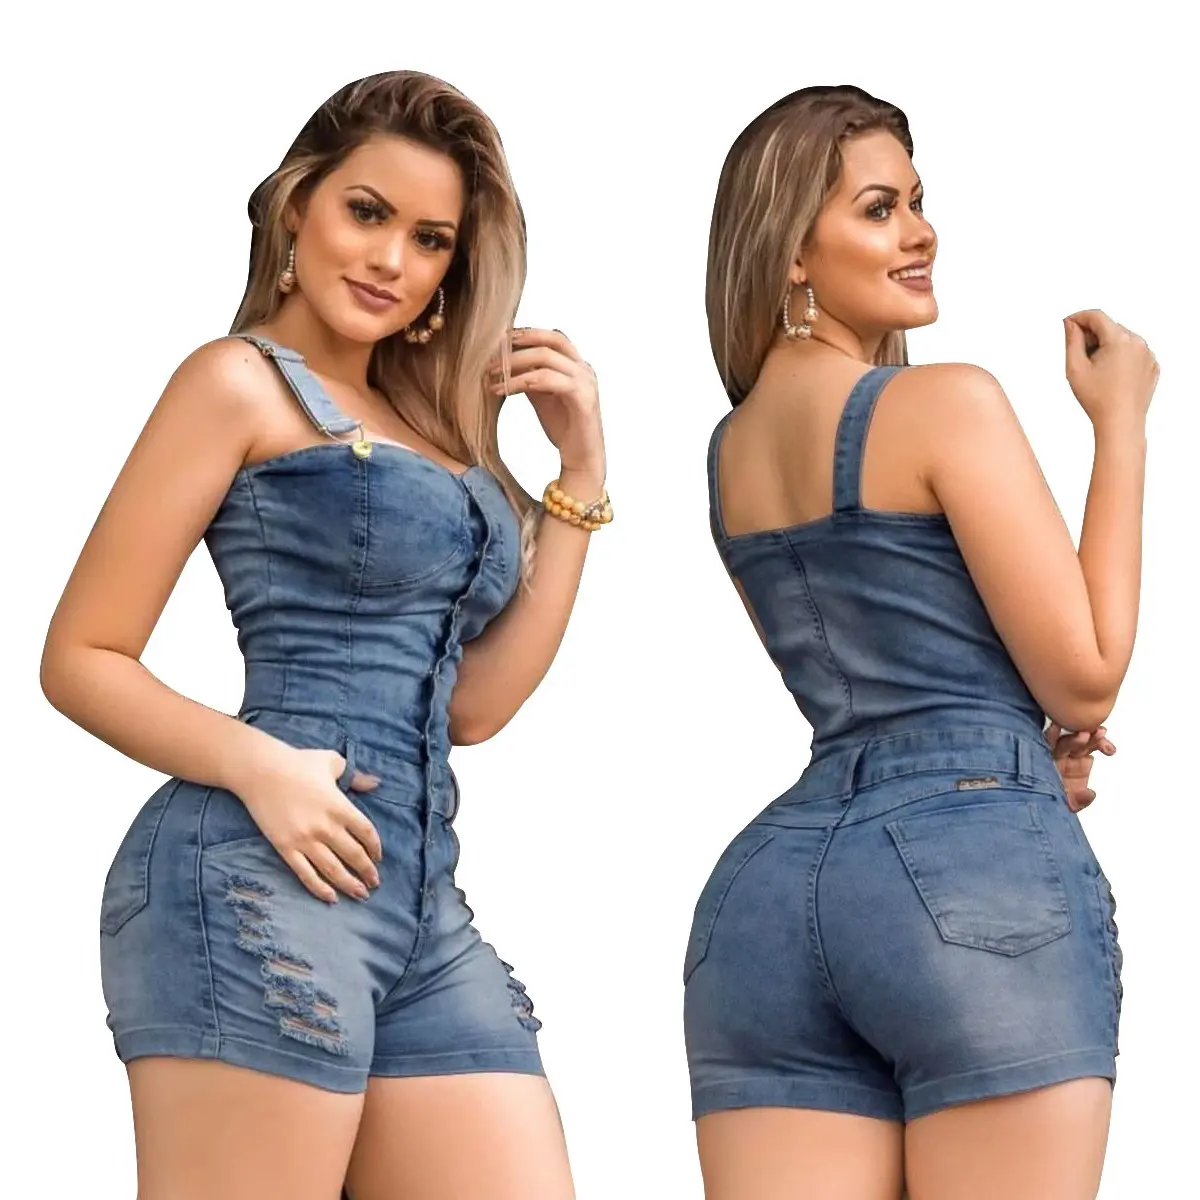 MT102-5027 Fashion women clothing girls formal jeans shorts casual overalls denim jumpsuit